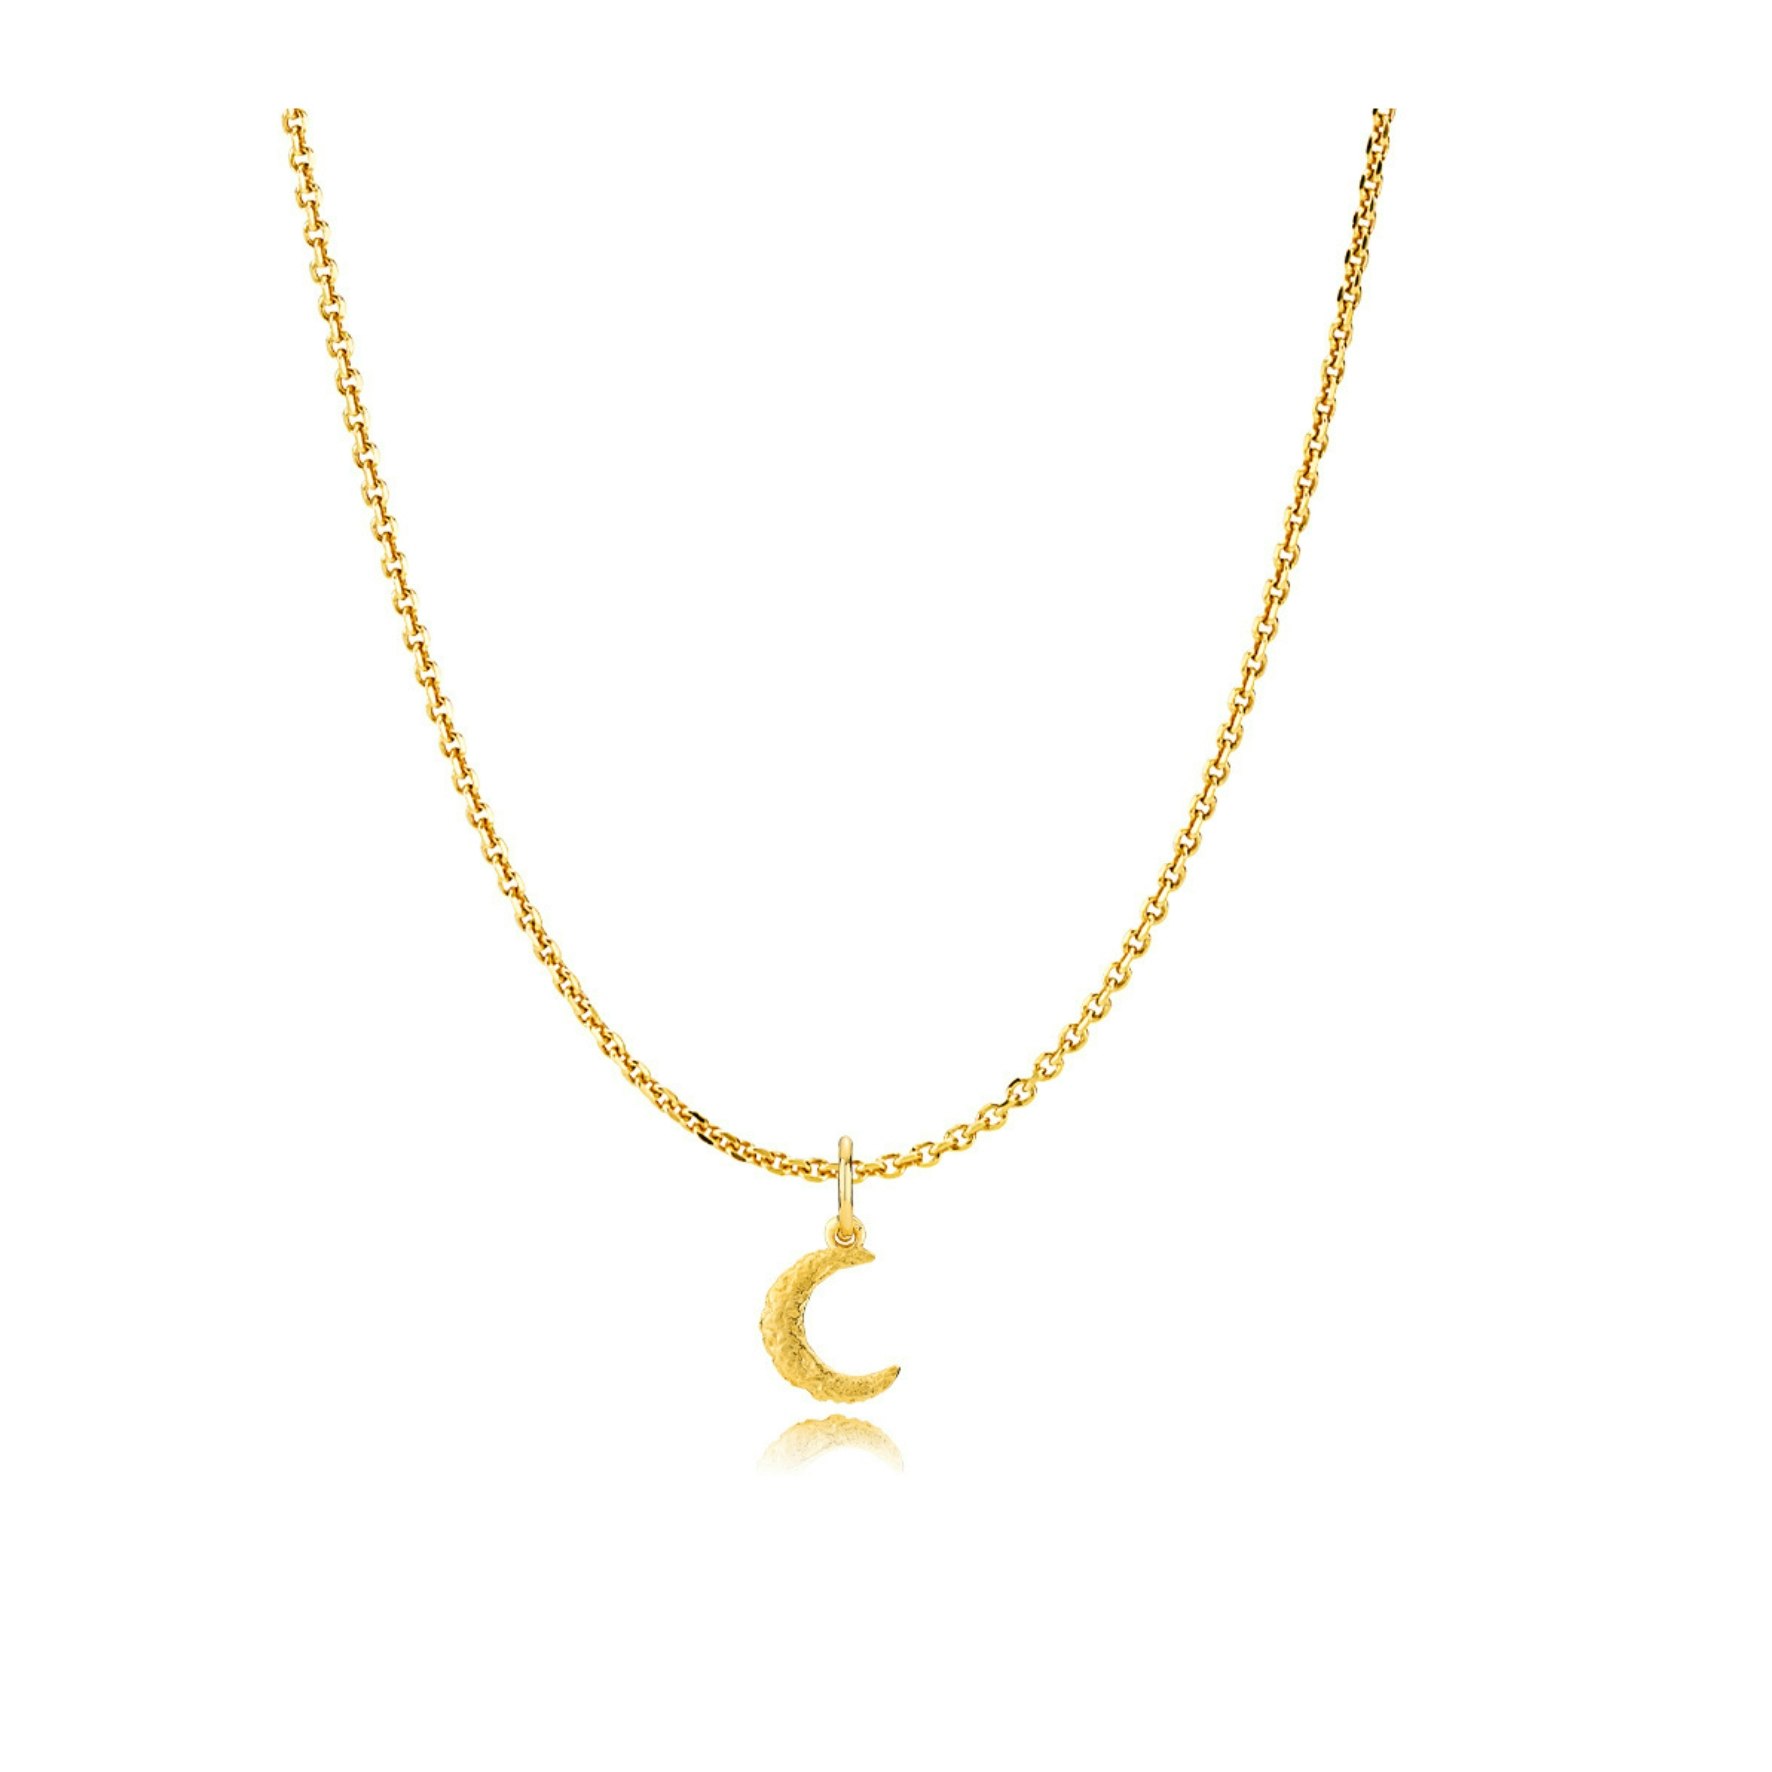 Universe Moon Necklace from Sistie in Goldplated Silver Sterling 925